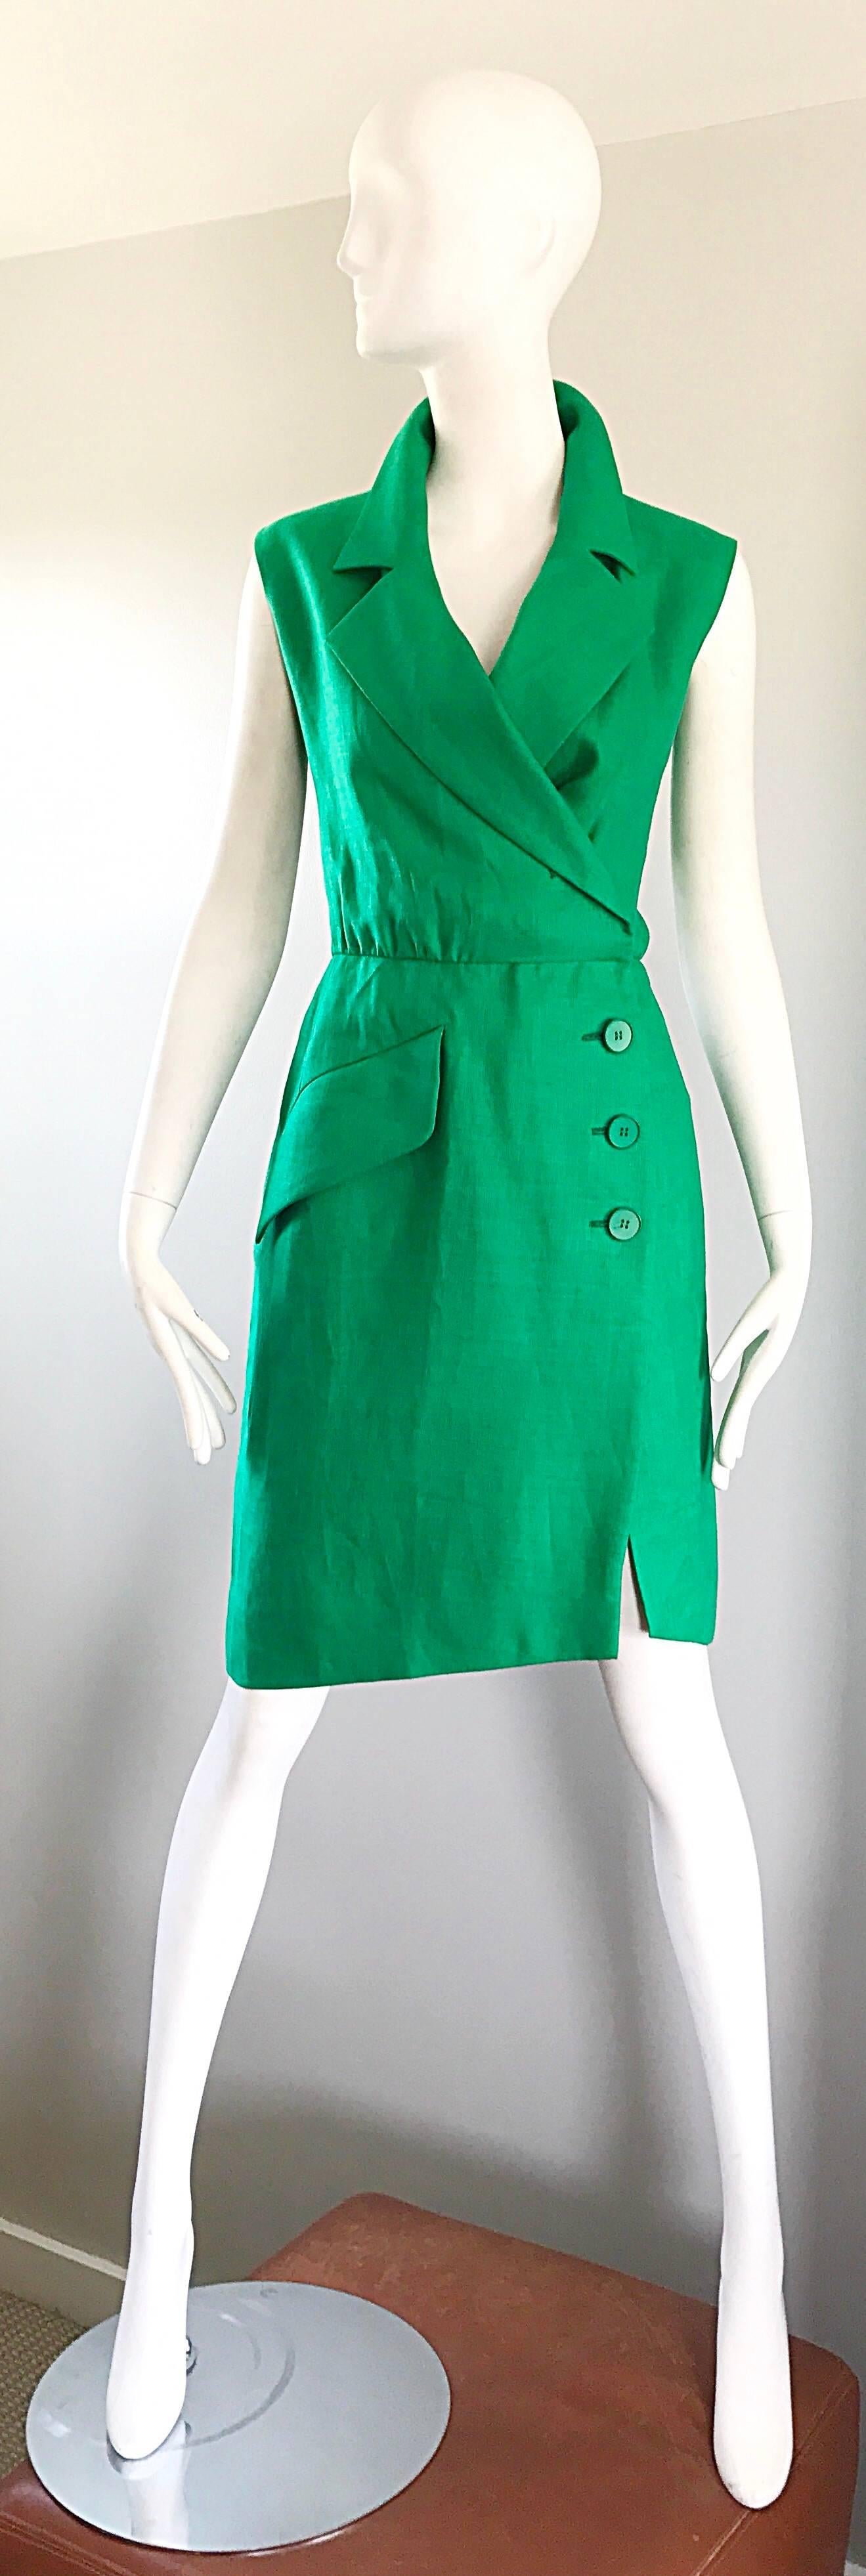 Chic 90s YVES SAINT LAURENT 'Rive Gauhce' Kelly / Emerald green sleeveless linen Tuxedo day dress! Features a double breasted style, with both interior and external buttons. Signature YSL Avant Garde lapels. Large pocket at right side hip.